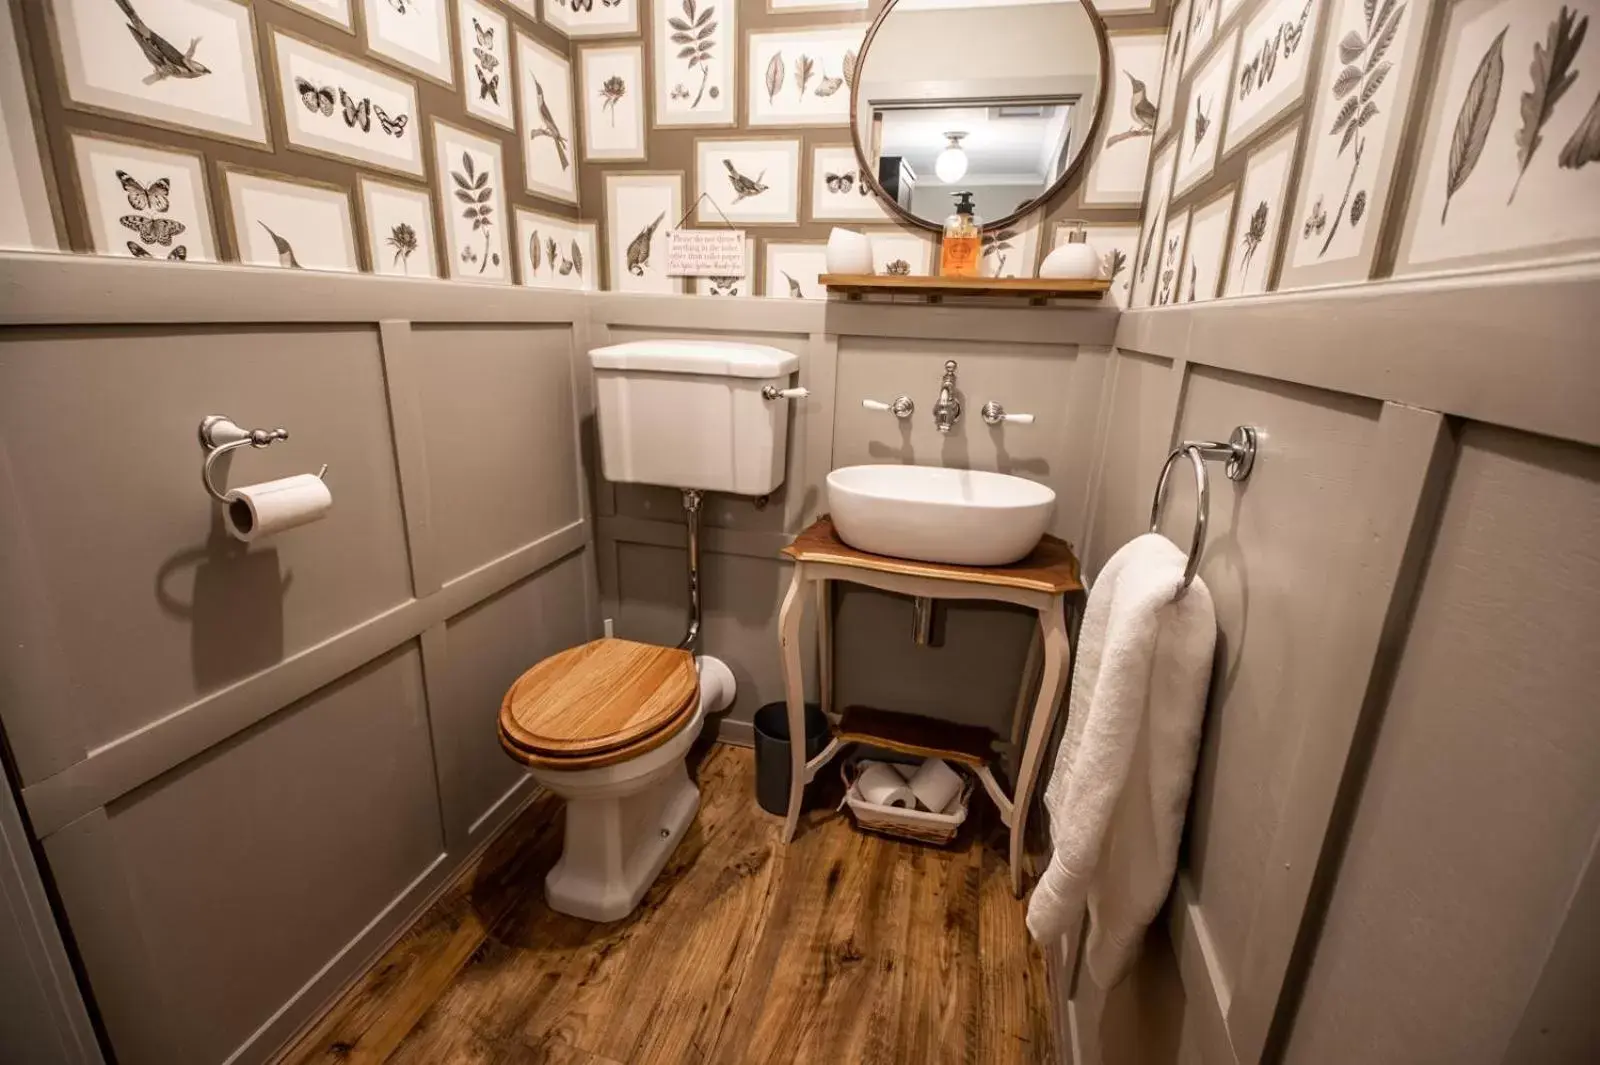 Bathroom in White Rose Tower